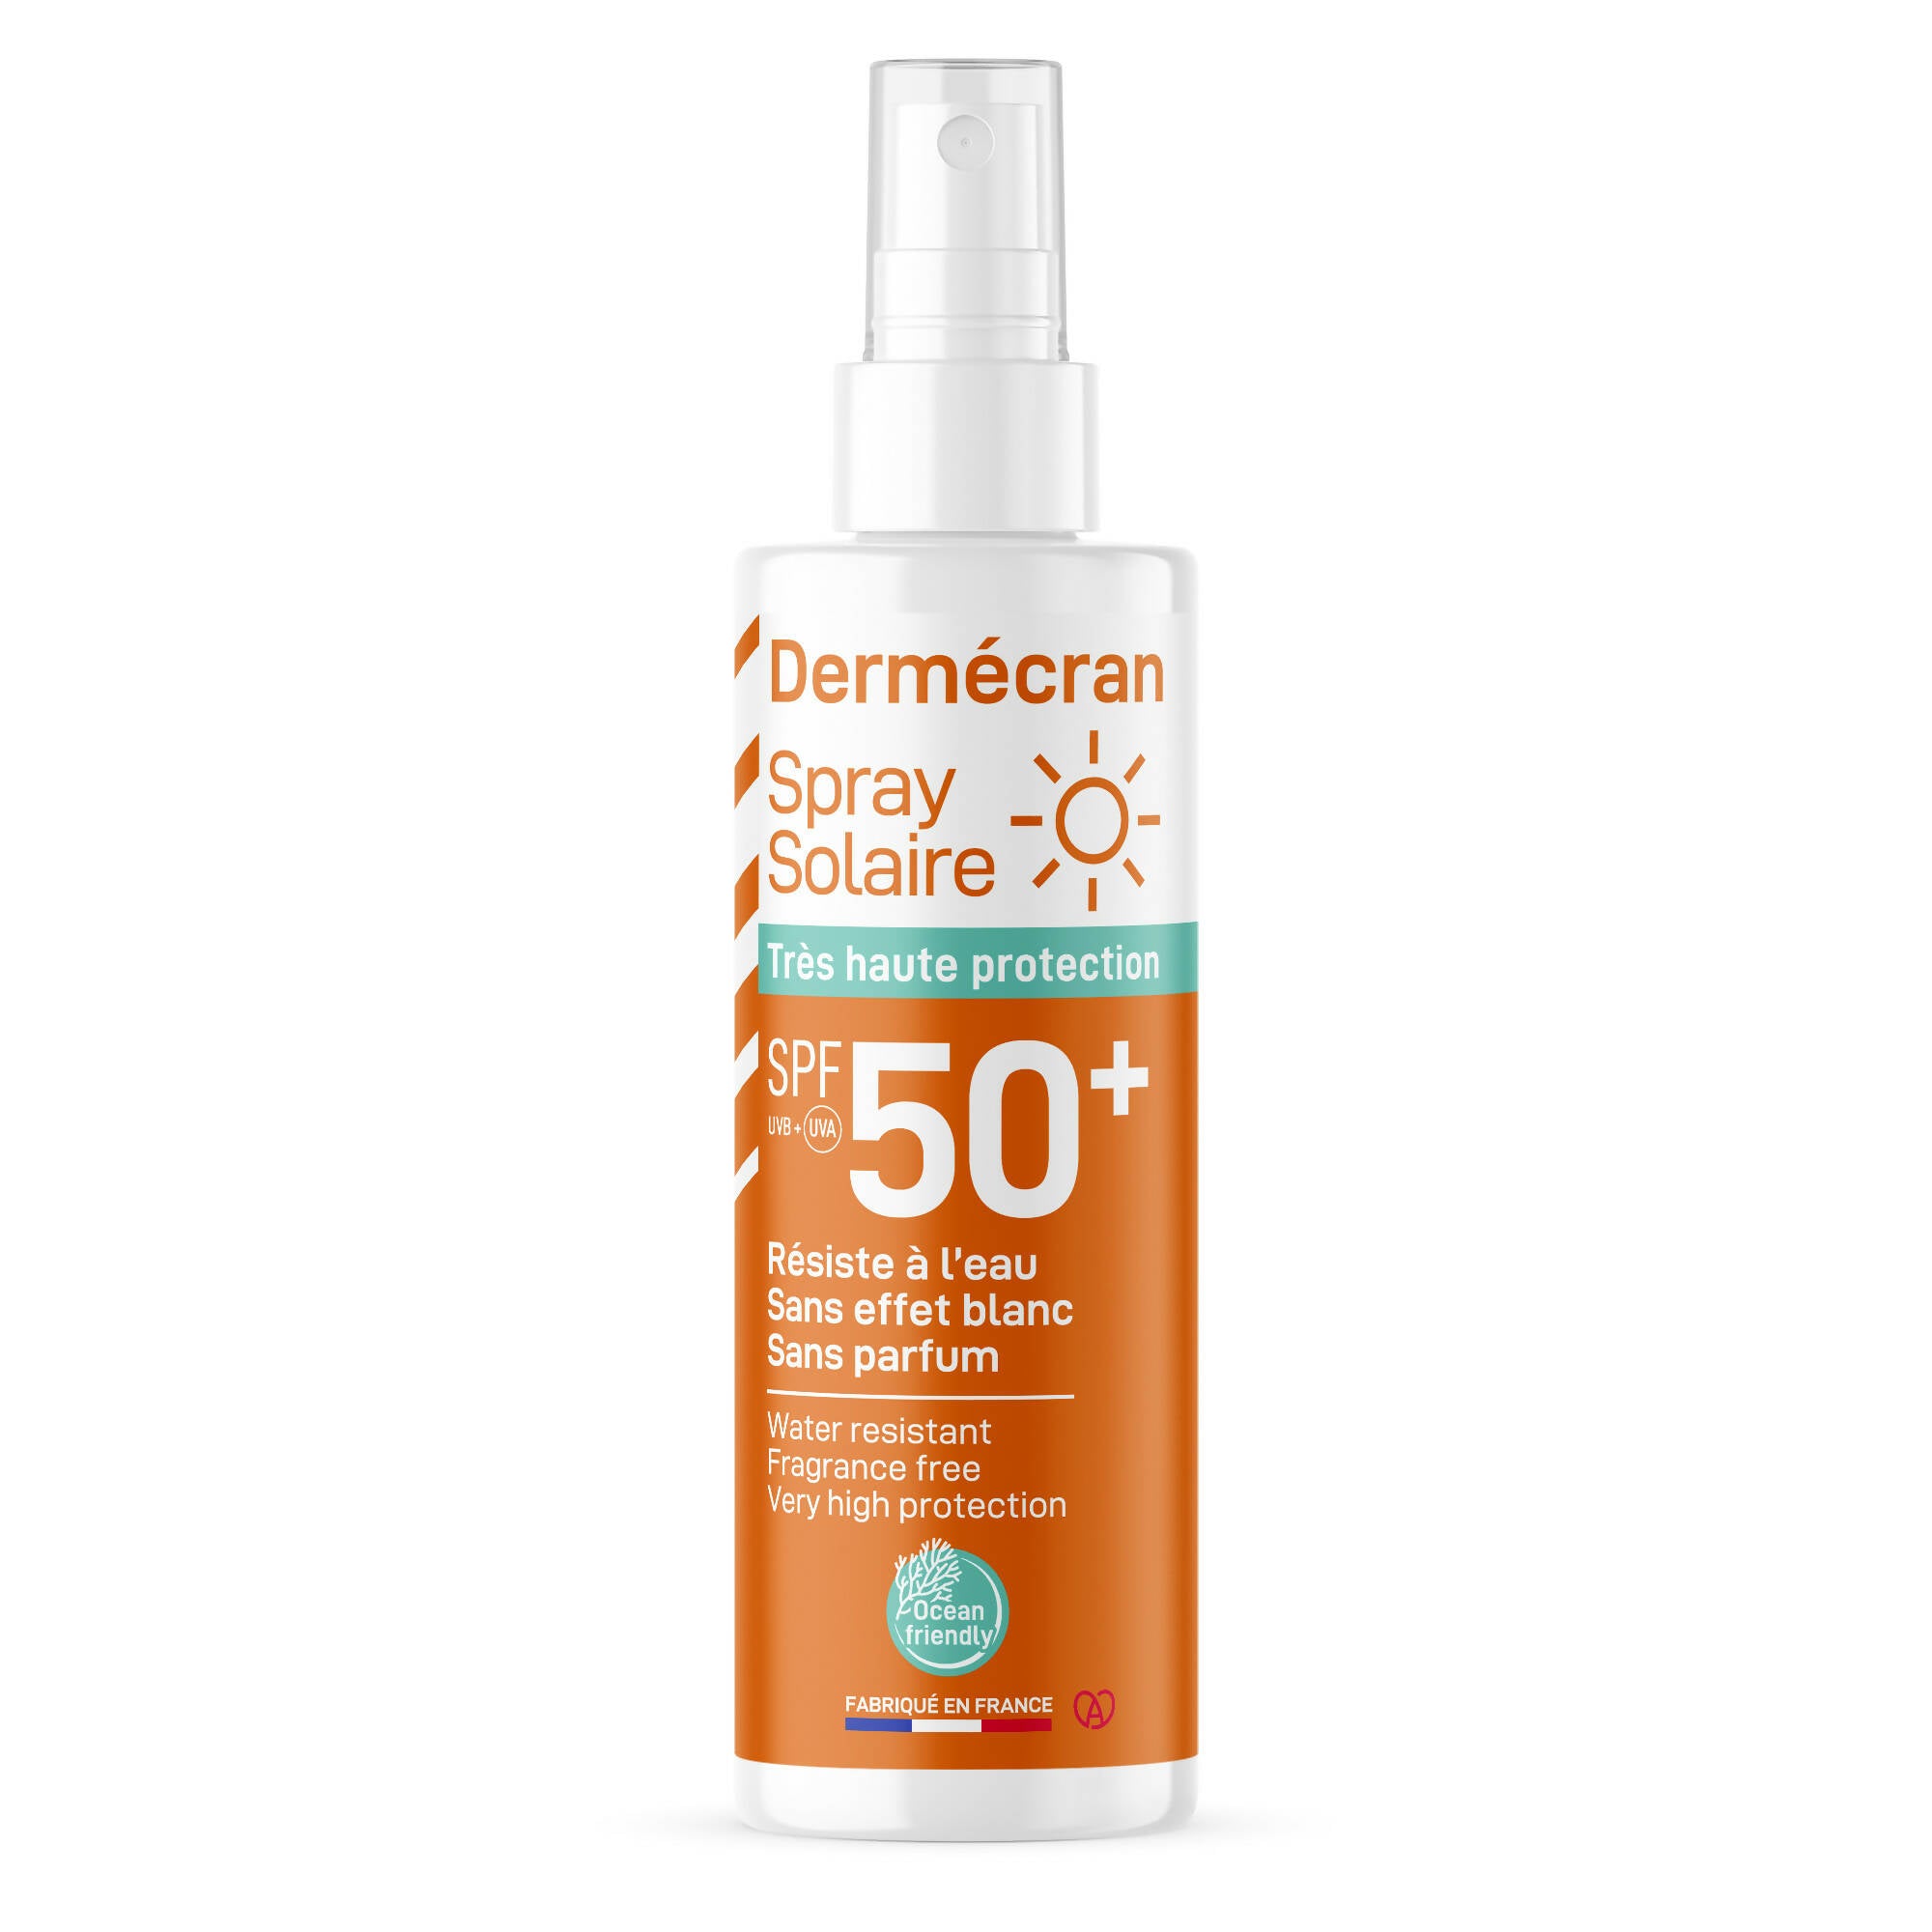 SORIFA - Set of 3 - Dermscreen - SPF50+ sun spray - Face and body - Ocean Friendly formula - Water resistant - For the whole family from 3 years old - Made in France - 200 ml spray - 0